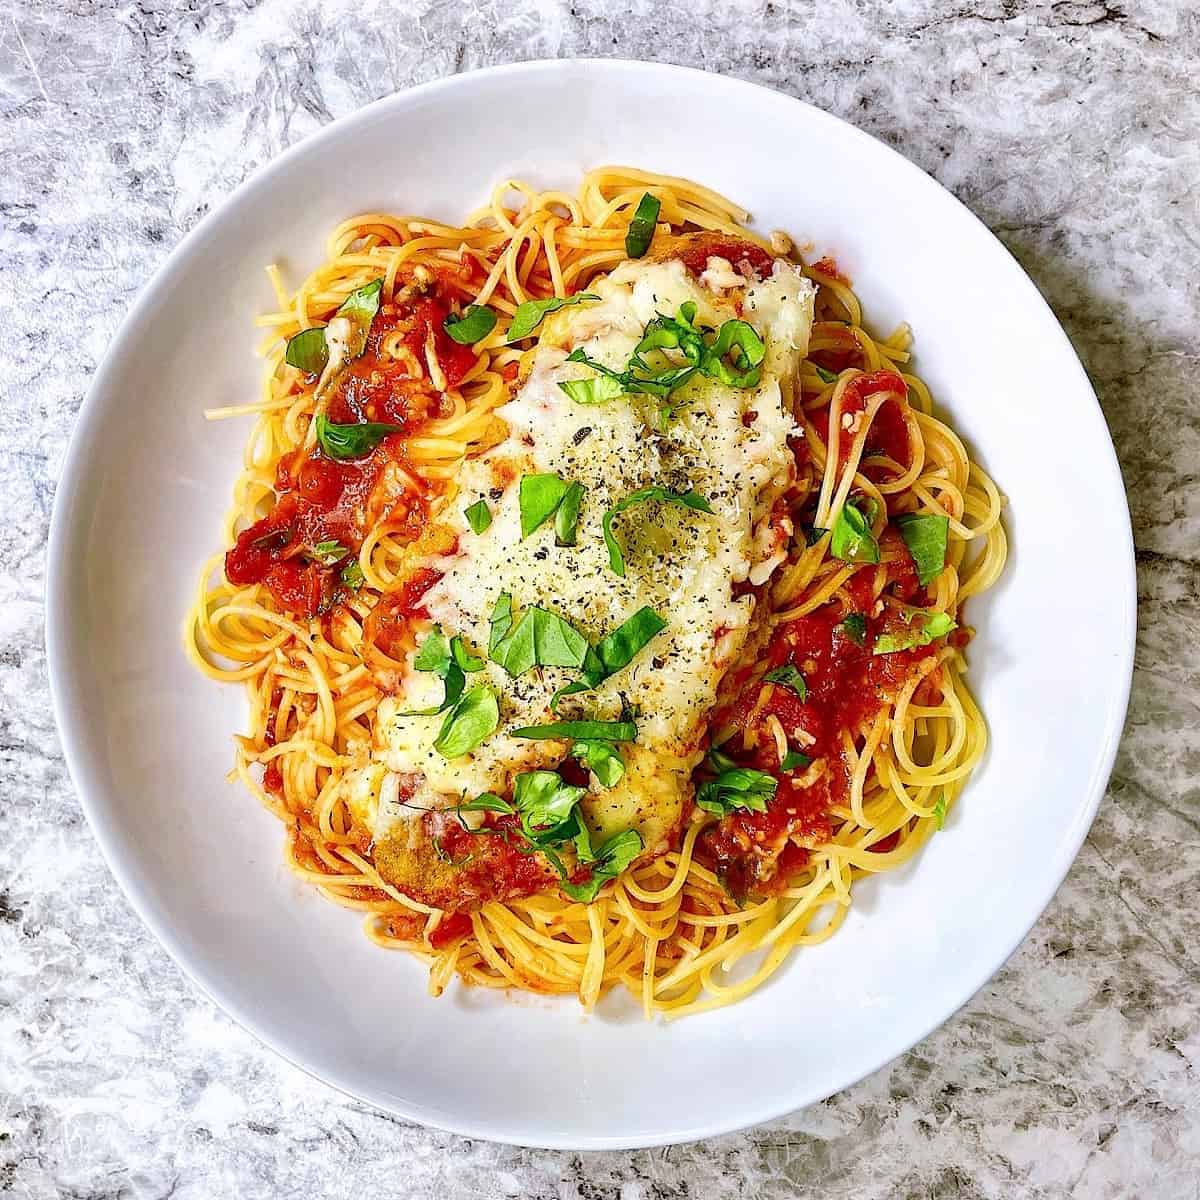 Chicken Parmesan topped with basil in white bowl